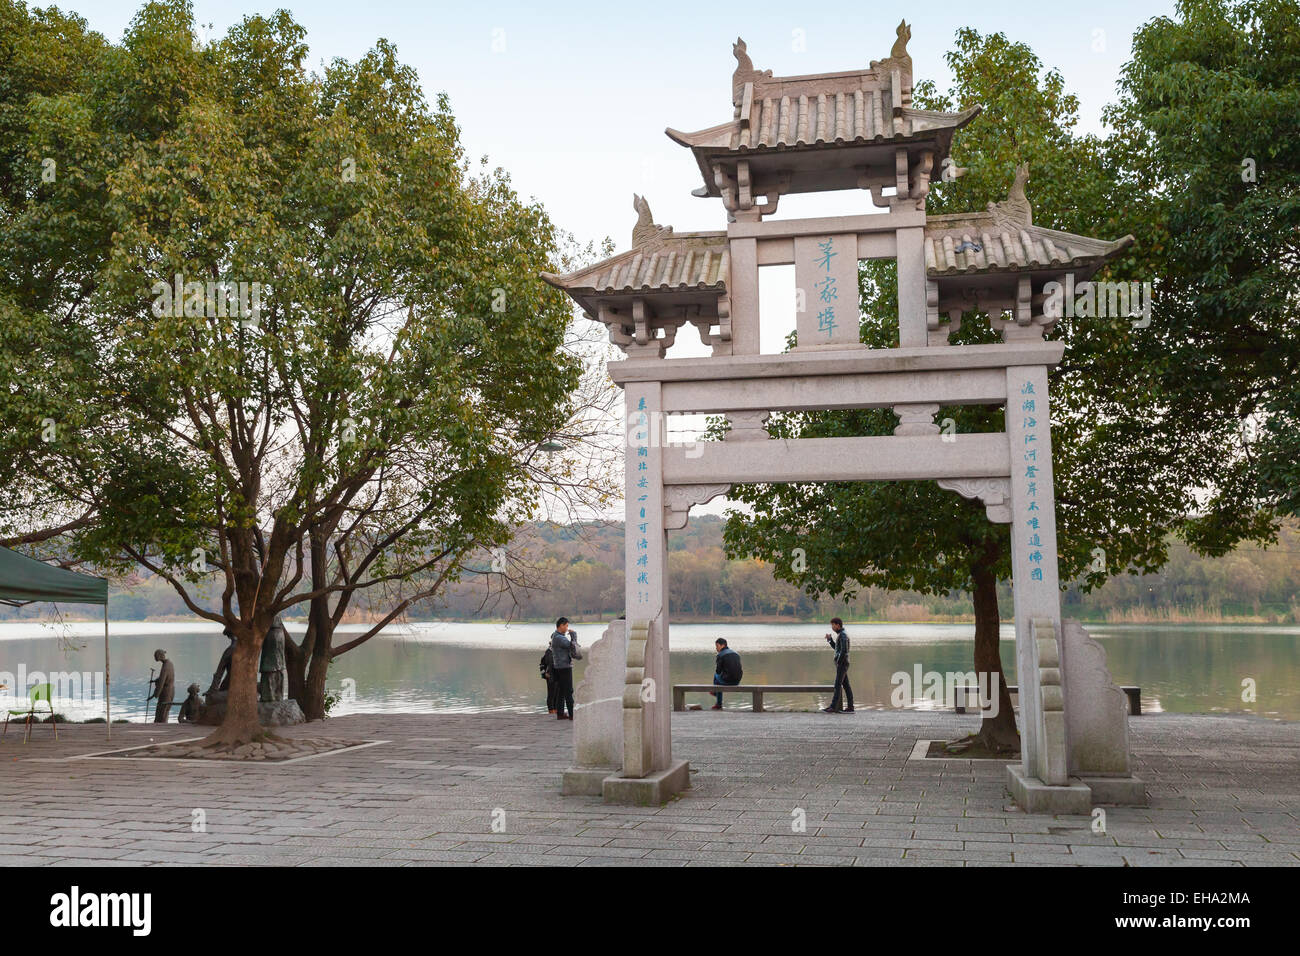 Hangzhou, China - December 4, 2014: Old traditional Chinese stone gate on the coast of West lake, famous park in Hangzhou city c Stock Photo